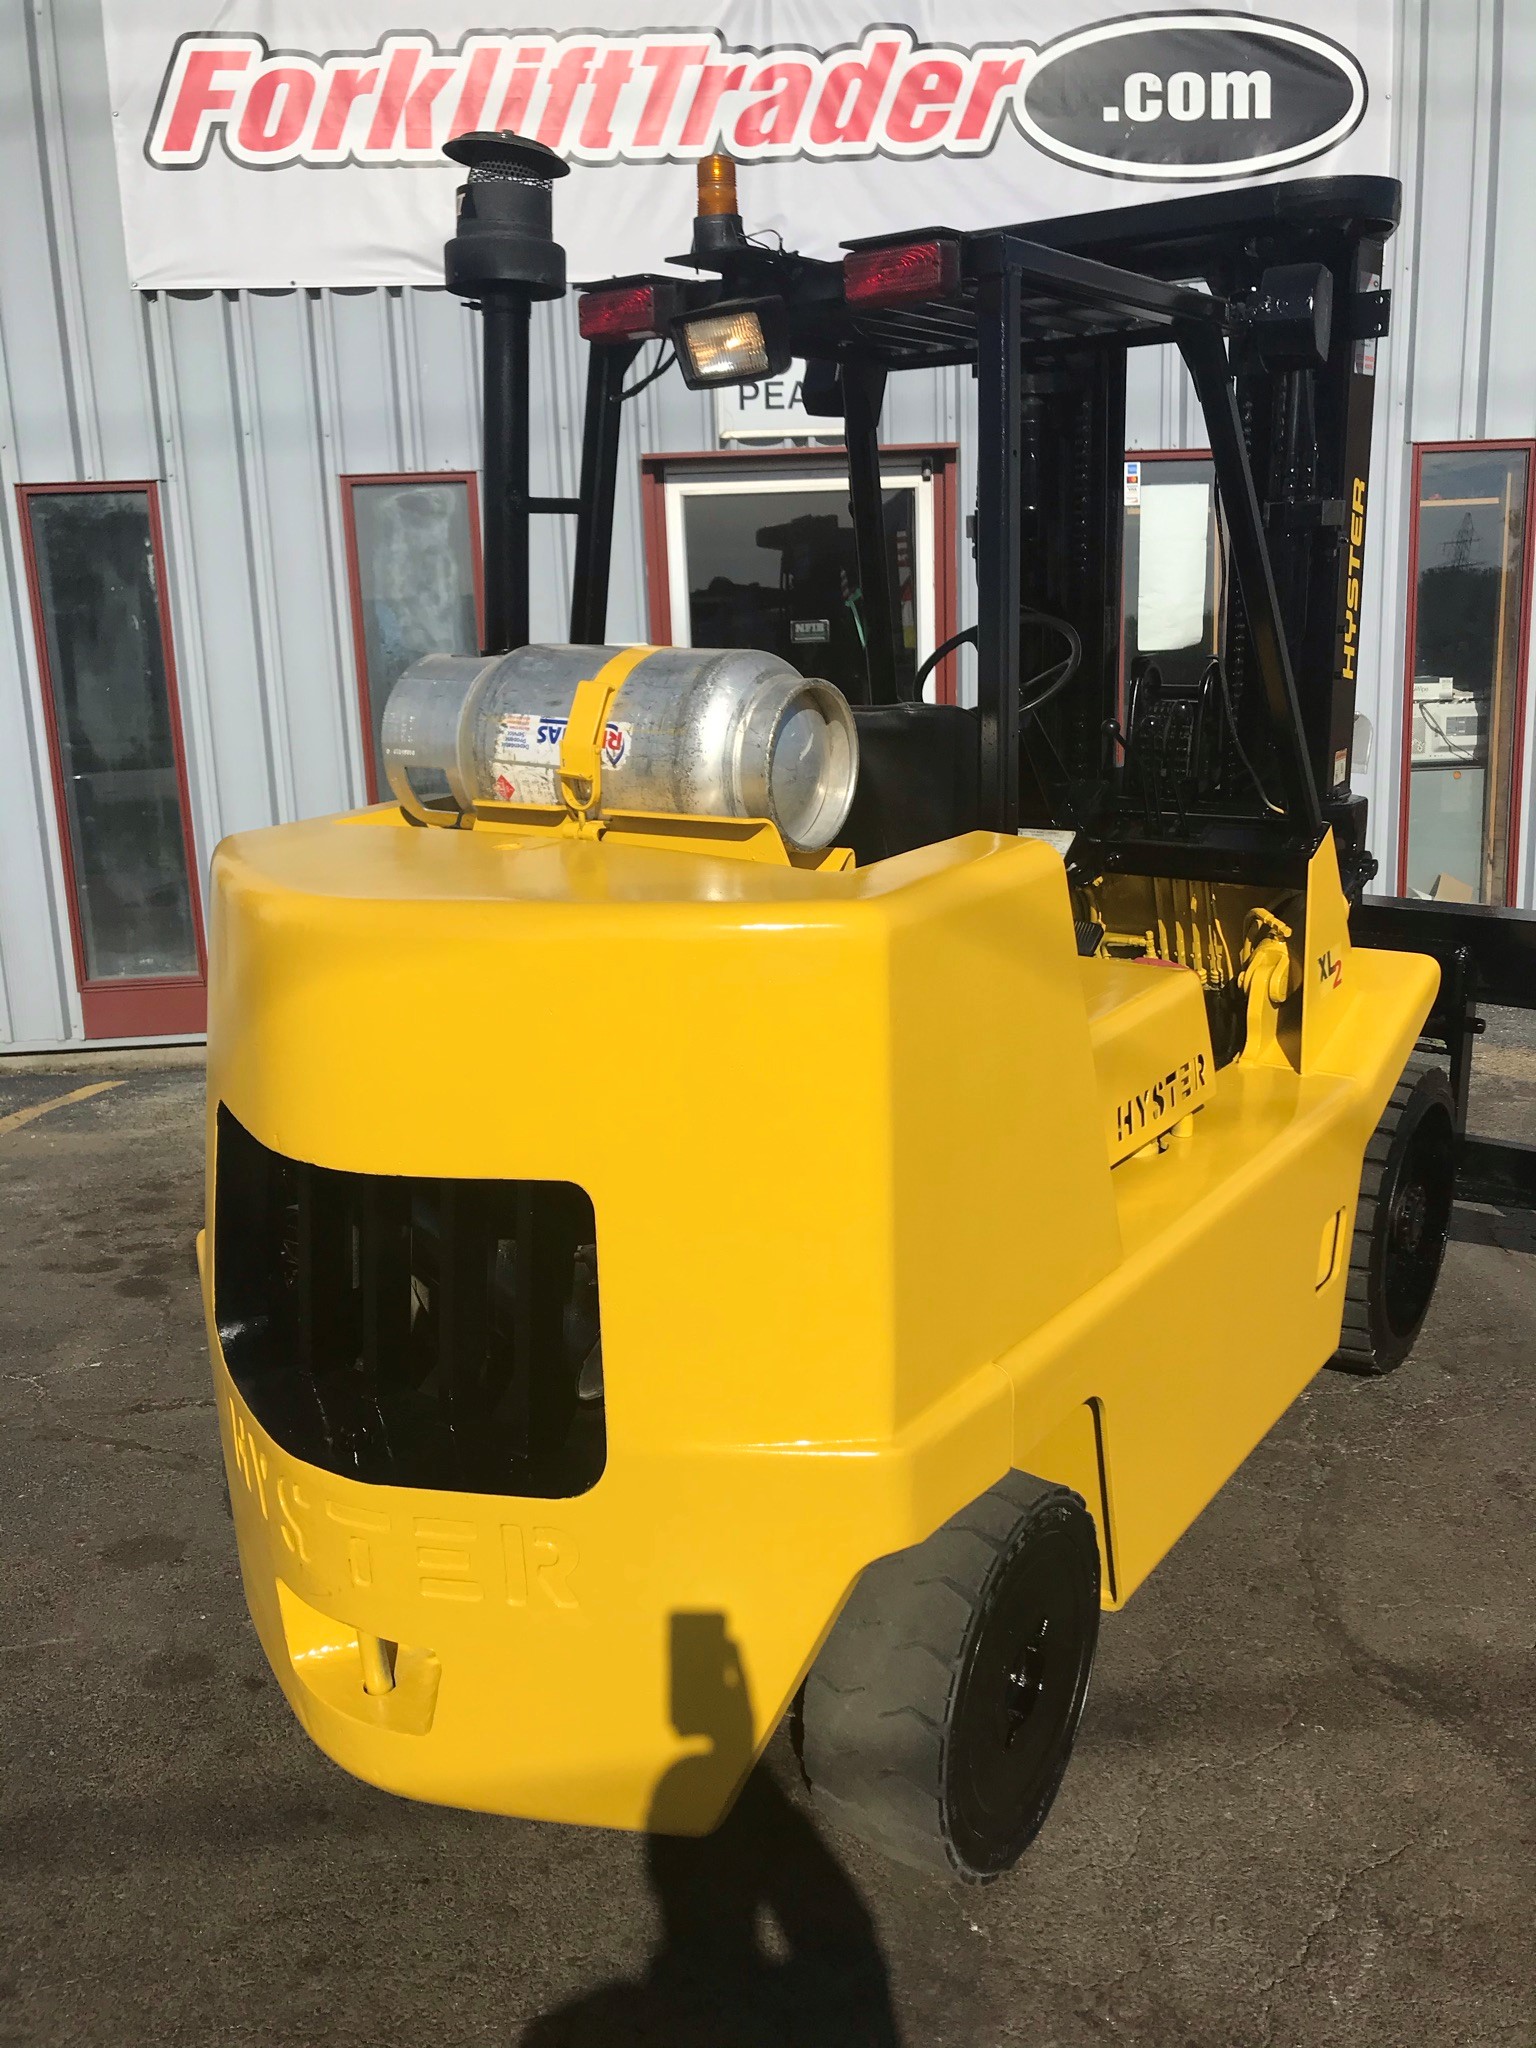 Cushion traction tires yellow hyster forklift for sale